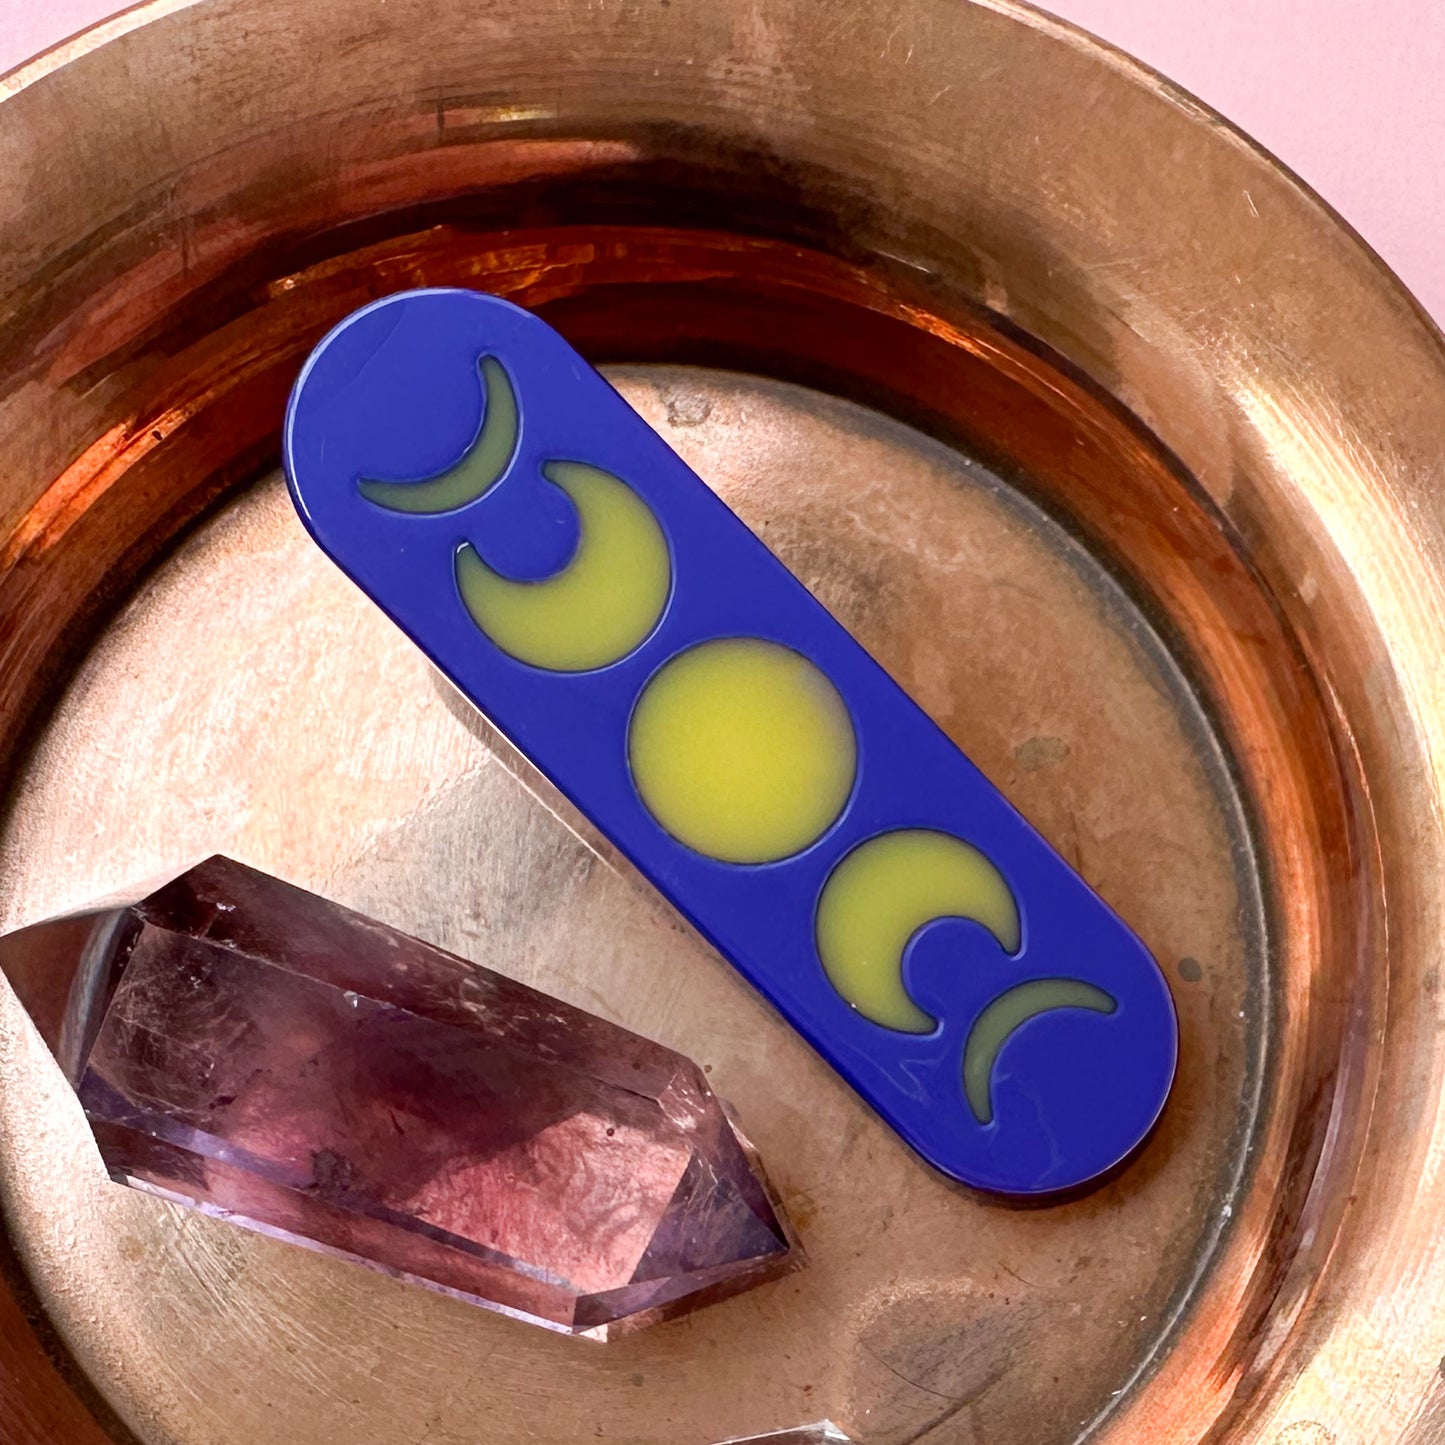 A hair clip that is shaped like a bandaid and is a purple background with shapes of moon phases on it. There is a double pointed amethyst crystal next to it and both items are in a copper dish. 